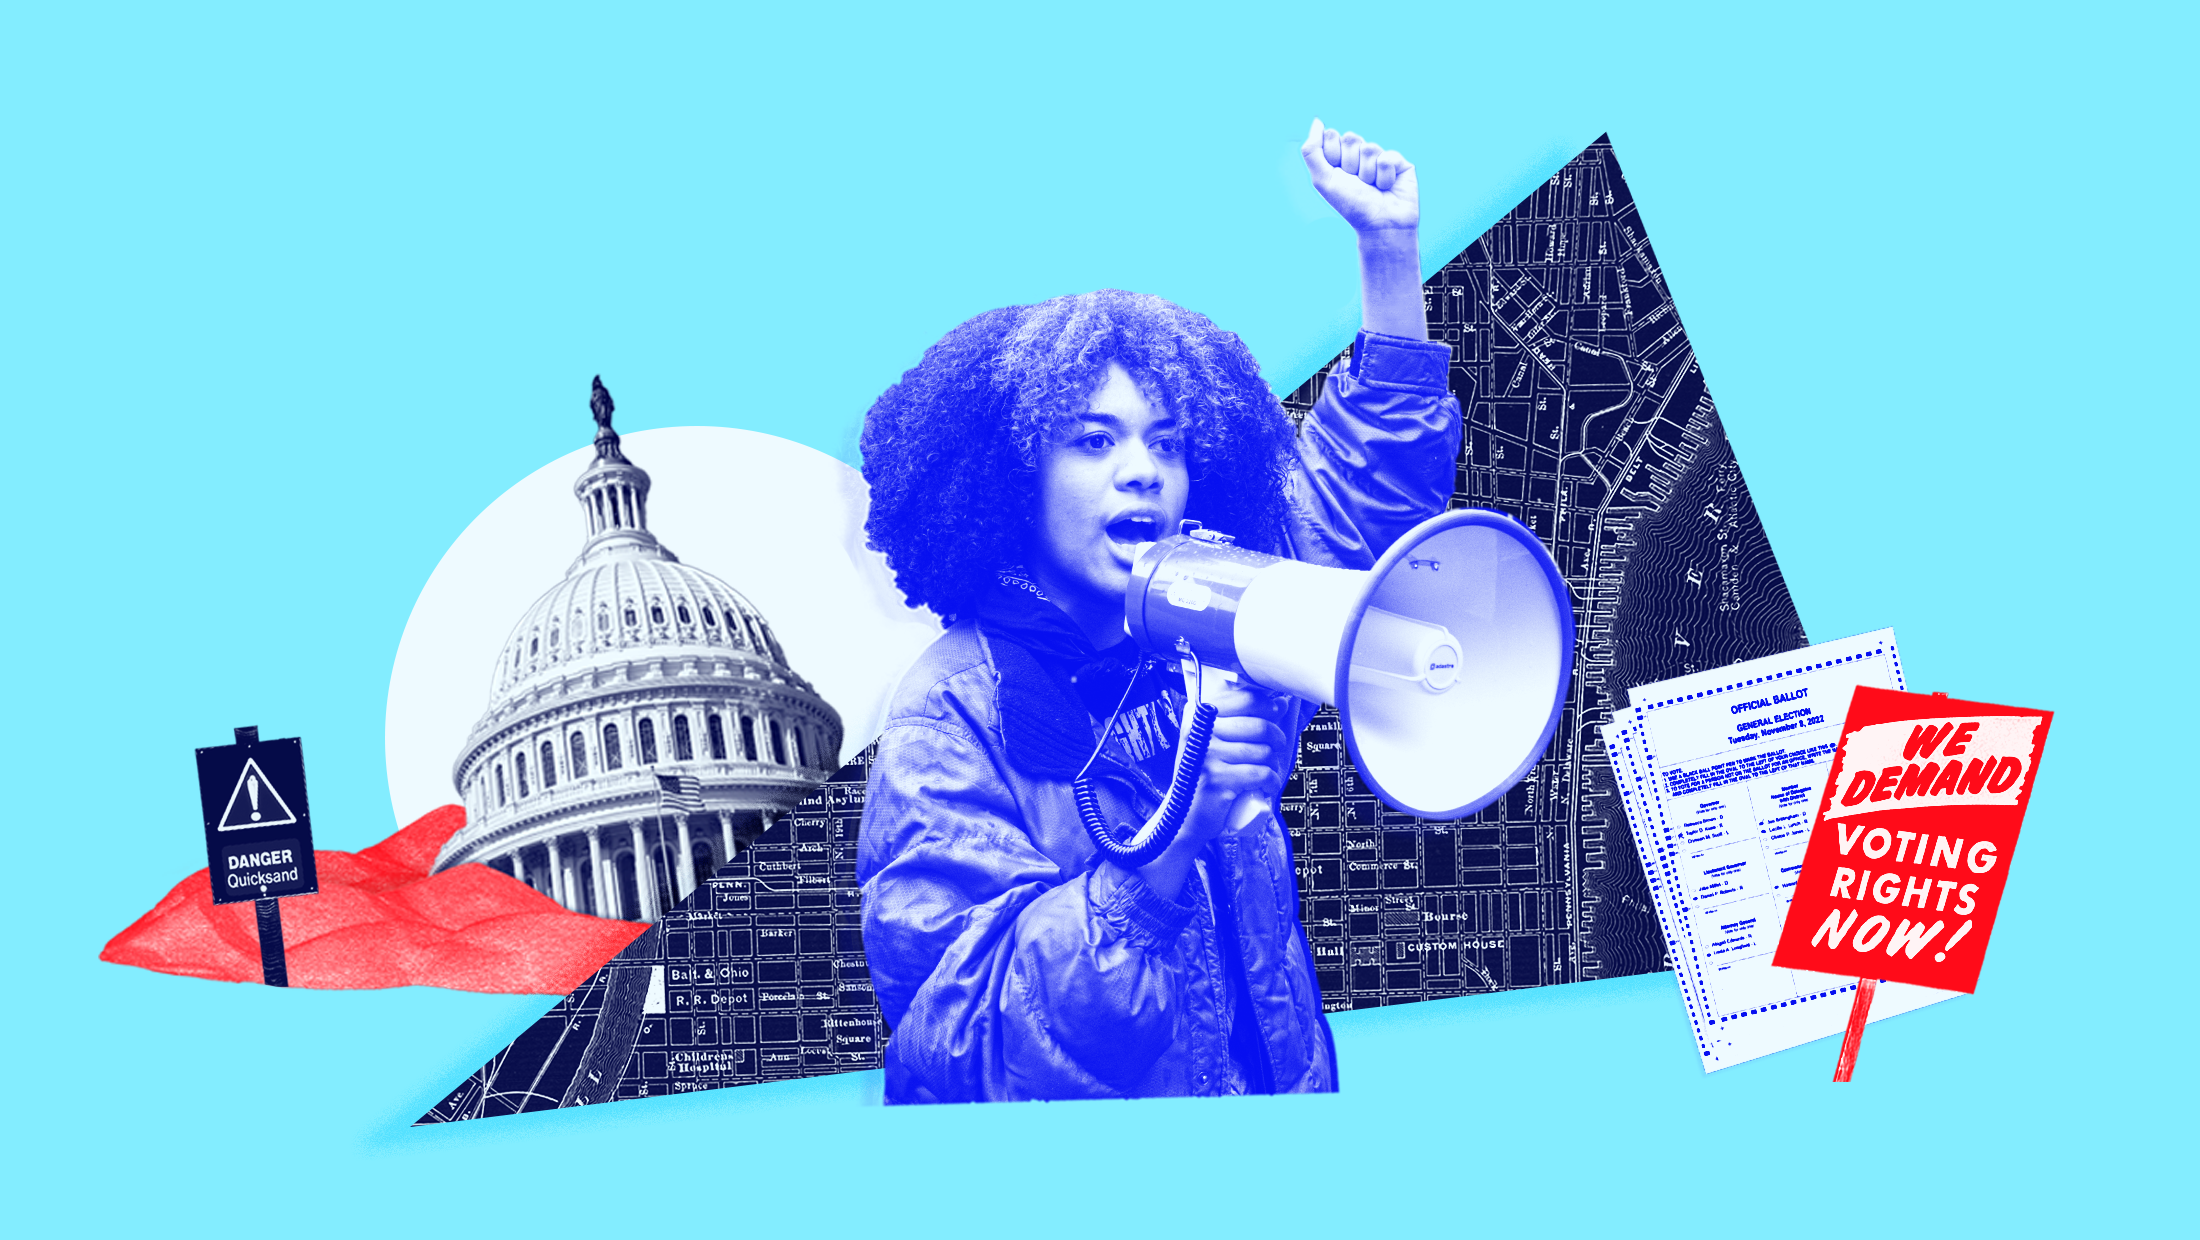 A collage featuring a female activist shouting into megaphone, a redistricting map, the U.S. Capitol sinking in quickstand with a warning sign that says "DANGER Quicksand", a ballot, and a protest sign that says "WE DEMAND VOTING RIGHTS NOW!"